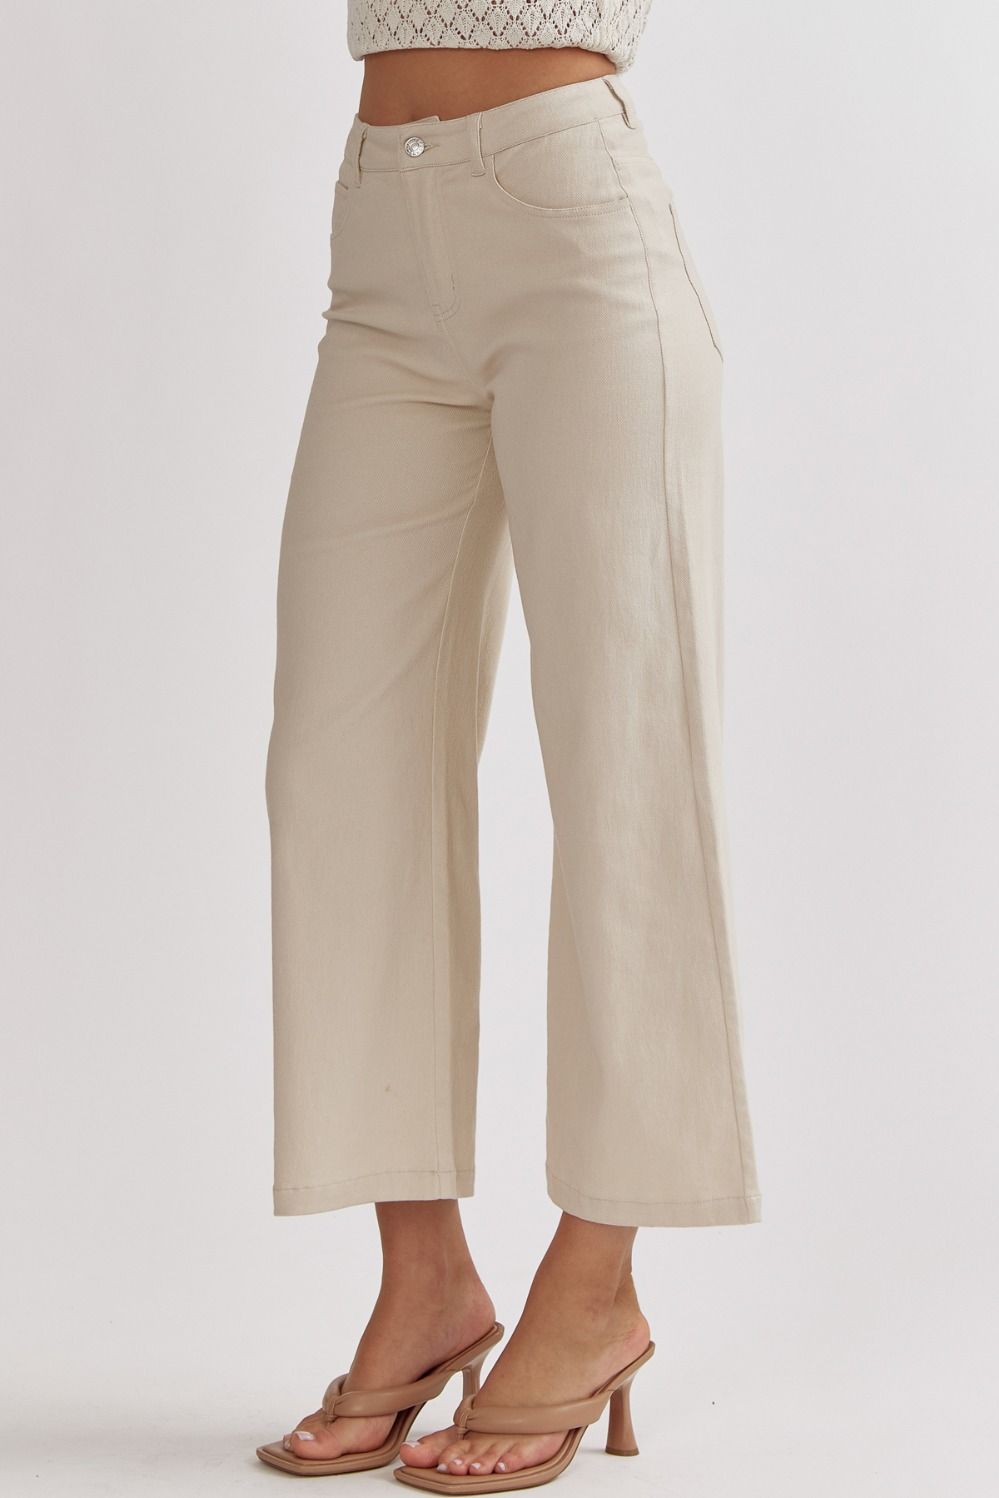 acid wash high waisted wide leg pants in sand-side view